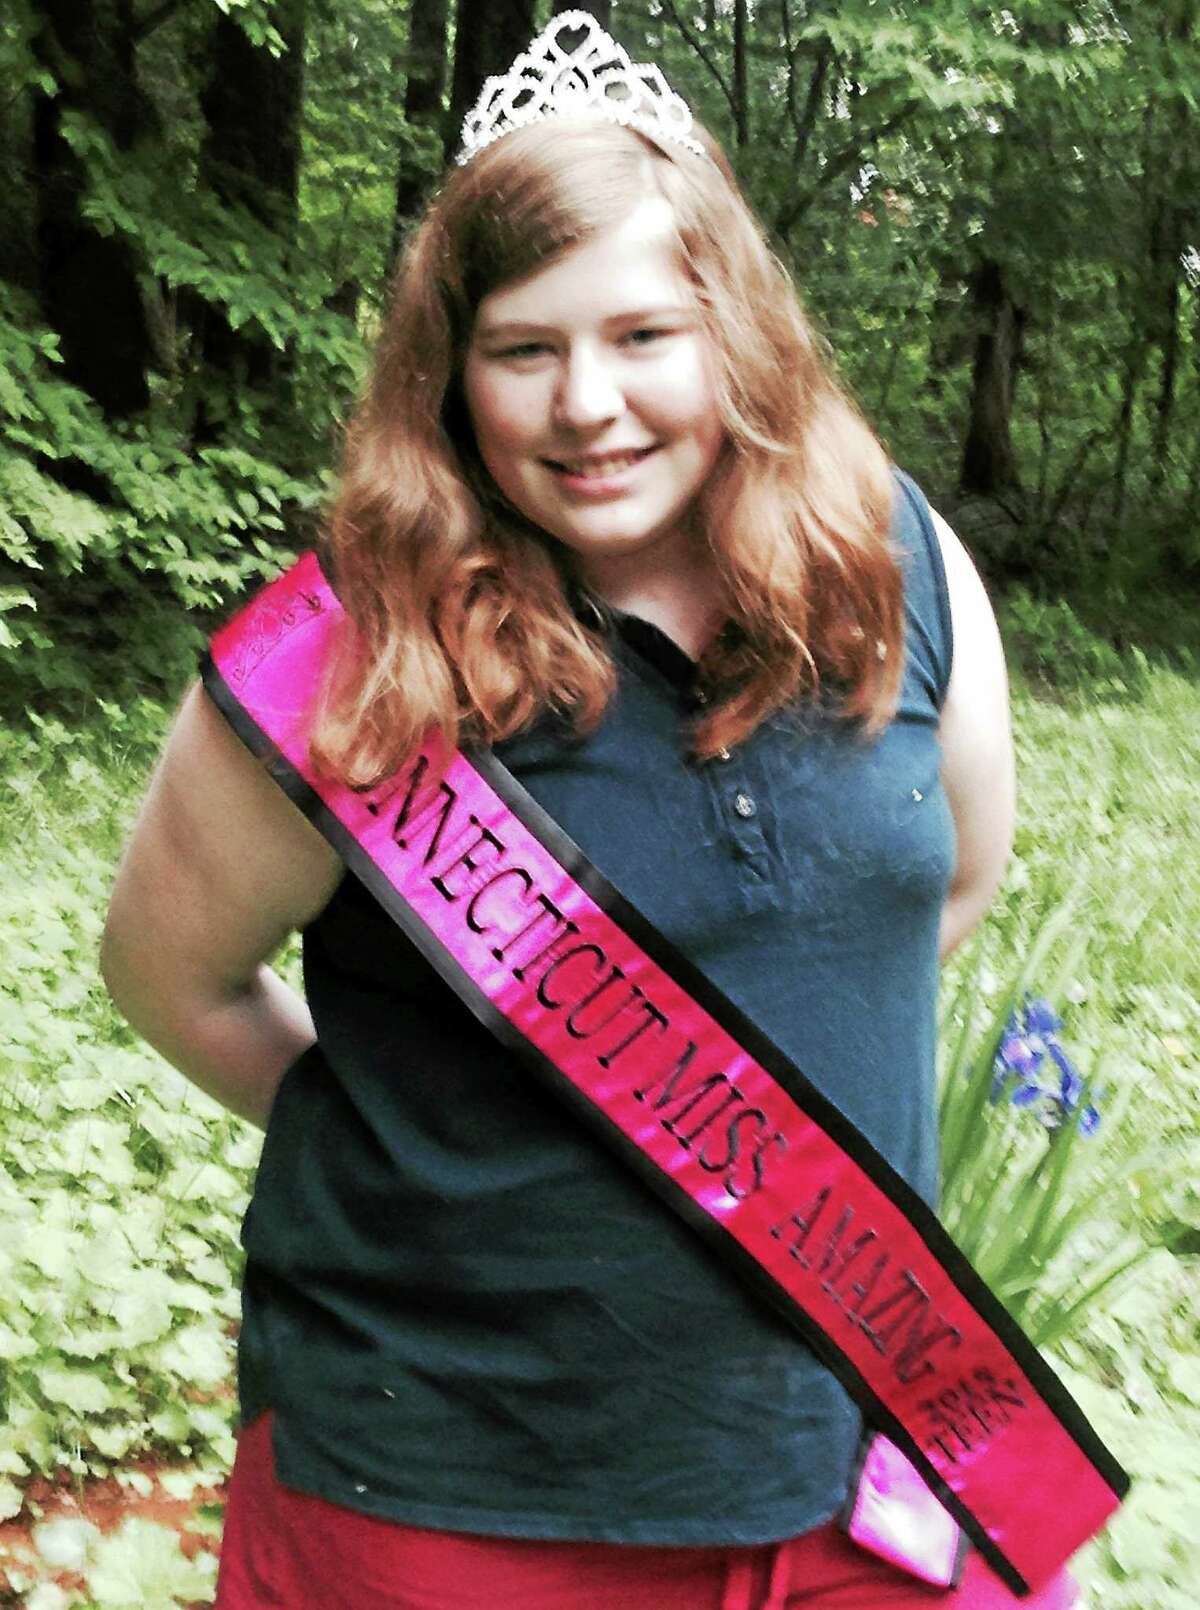 Courtesy Gabrielle Photography Supporters of Mya Grace DeShaw are raising money through crowd-sourding on Go Fund Me so she and her mother can travel to Los Angeles, California, in July to compete in the Miss Amazing pageant. The teen faces the unique challenges of apraxia, a severe speech disorder that also can impair fine motor skills and sensory processing.